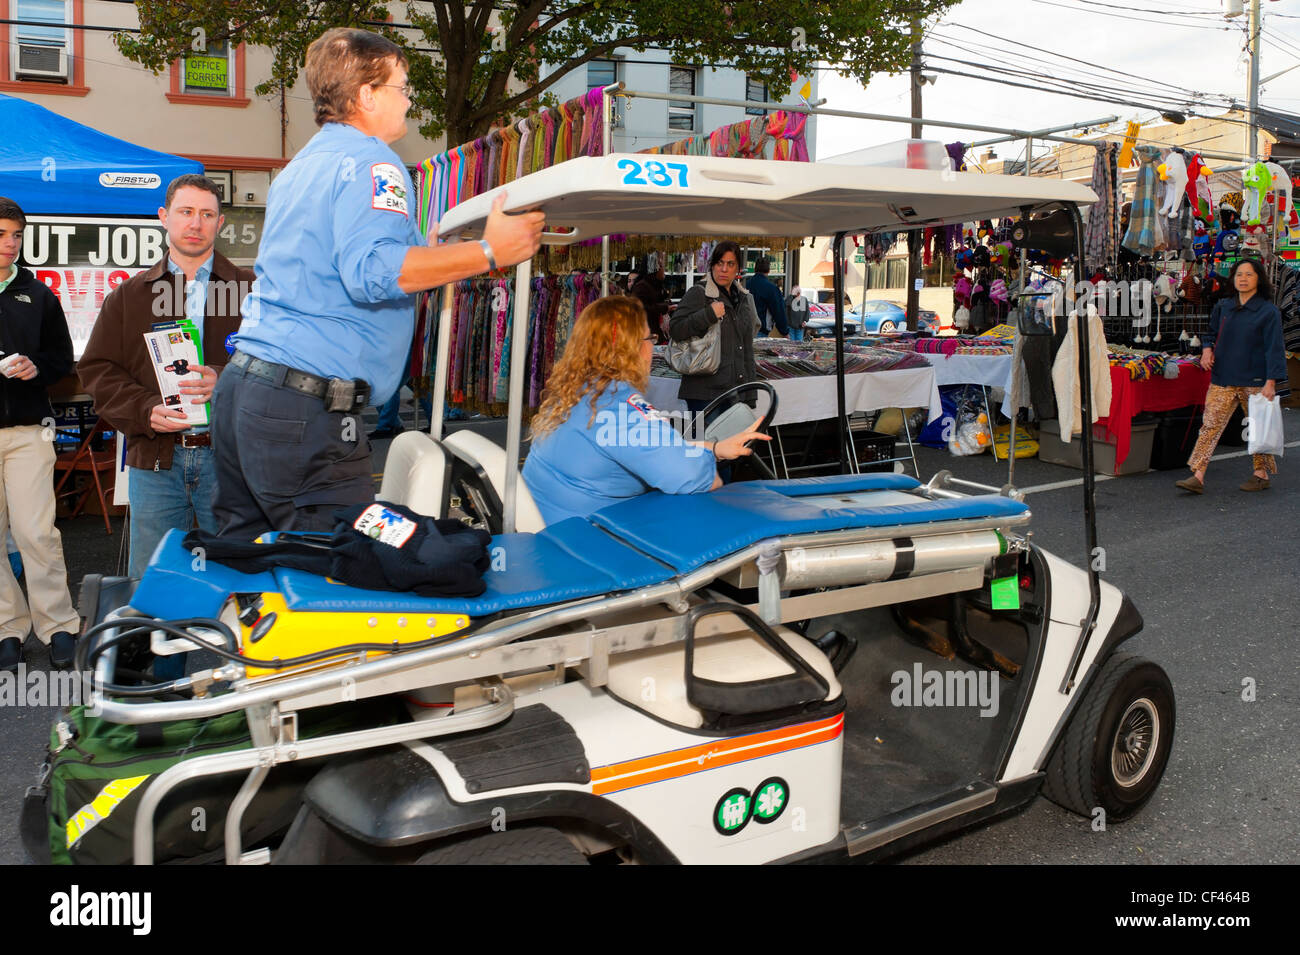 Two female EMT, Emergency Medical Technicians, on rescue cart racing to help at Merrick Street Fair, Merrick, New York, USA 2012 Stock Photo